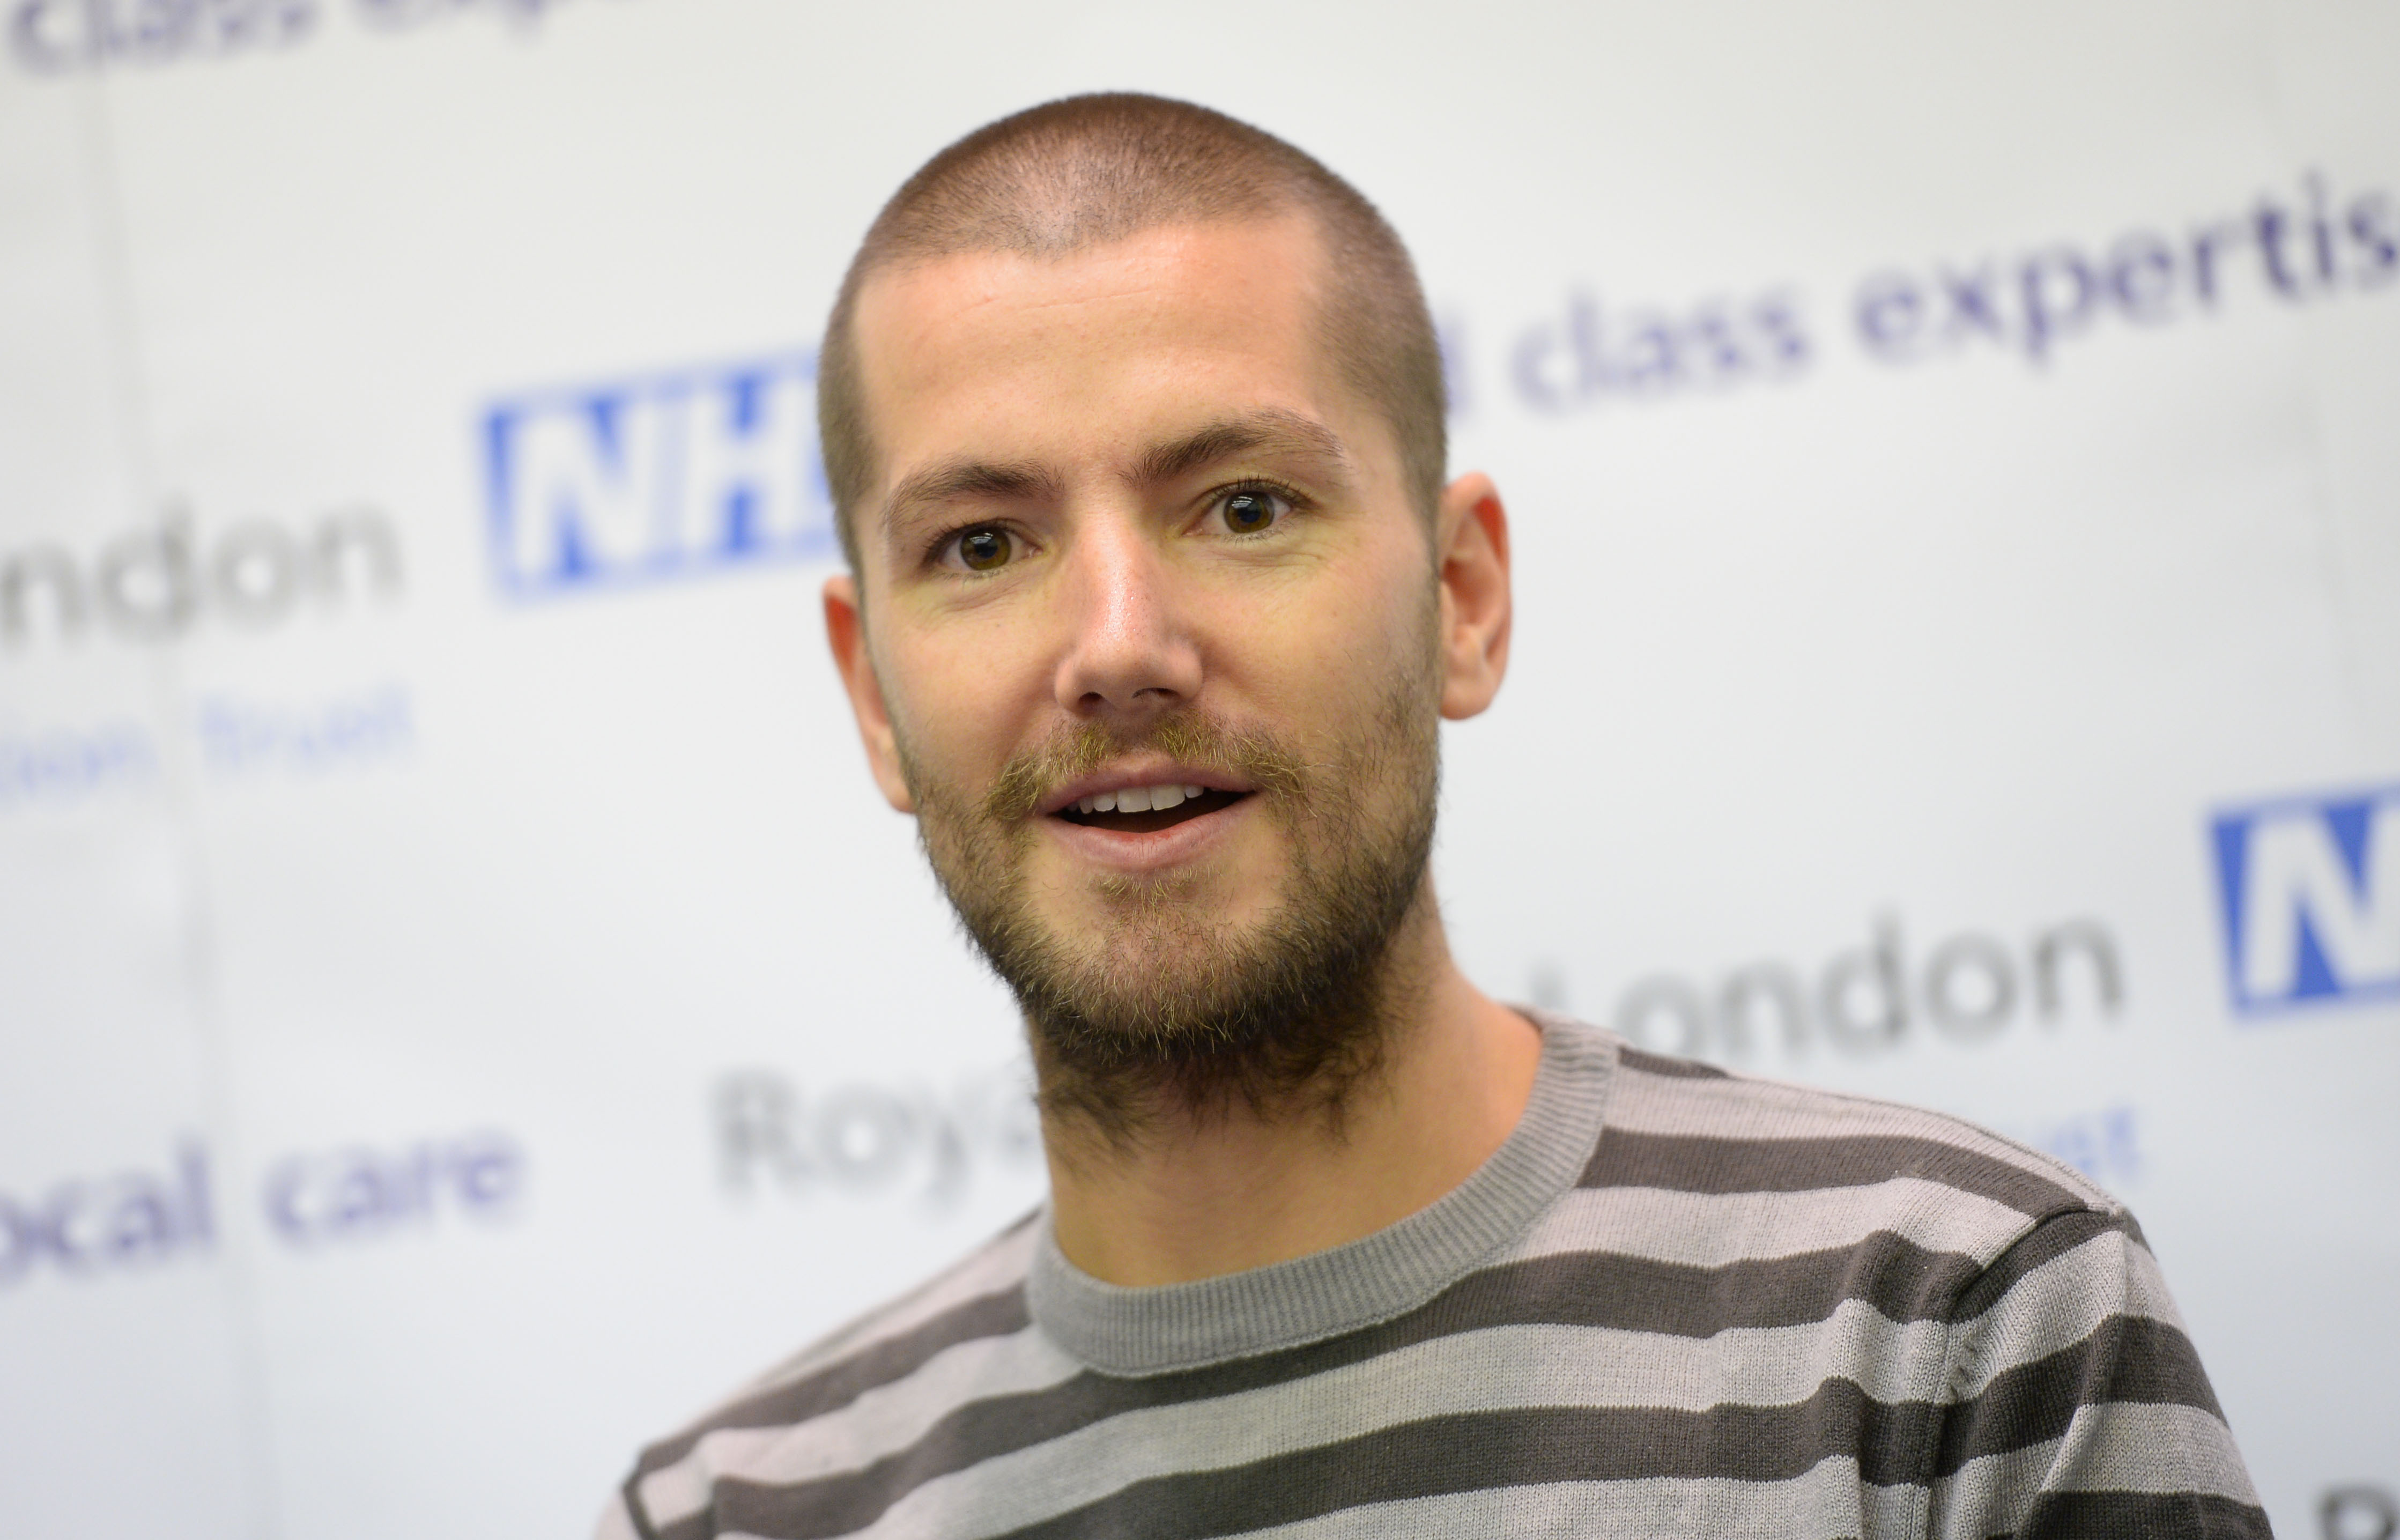 British Ebola survivor William Pooley during a press conference at the Royal Free Hospital in north London, Dec. 13, 2014. (Andrew Matthews—PA Wire/AP)